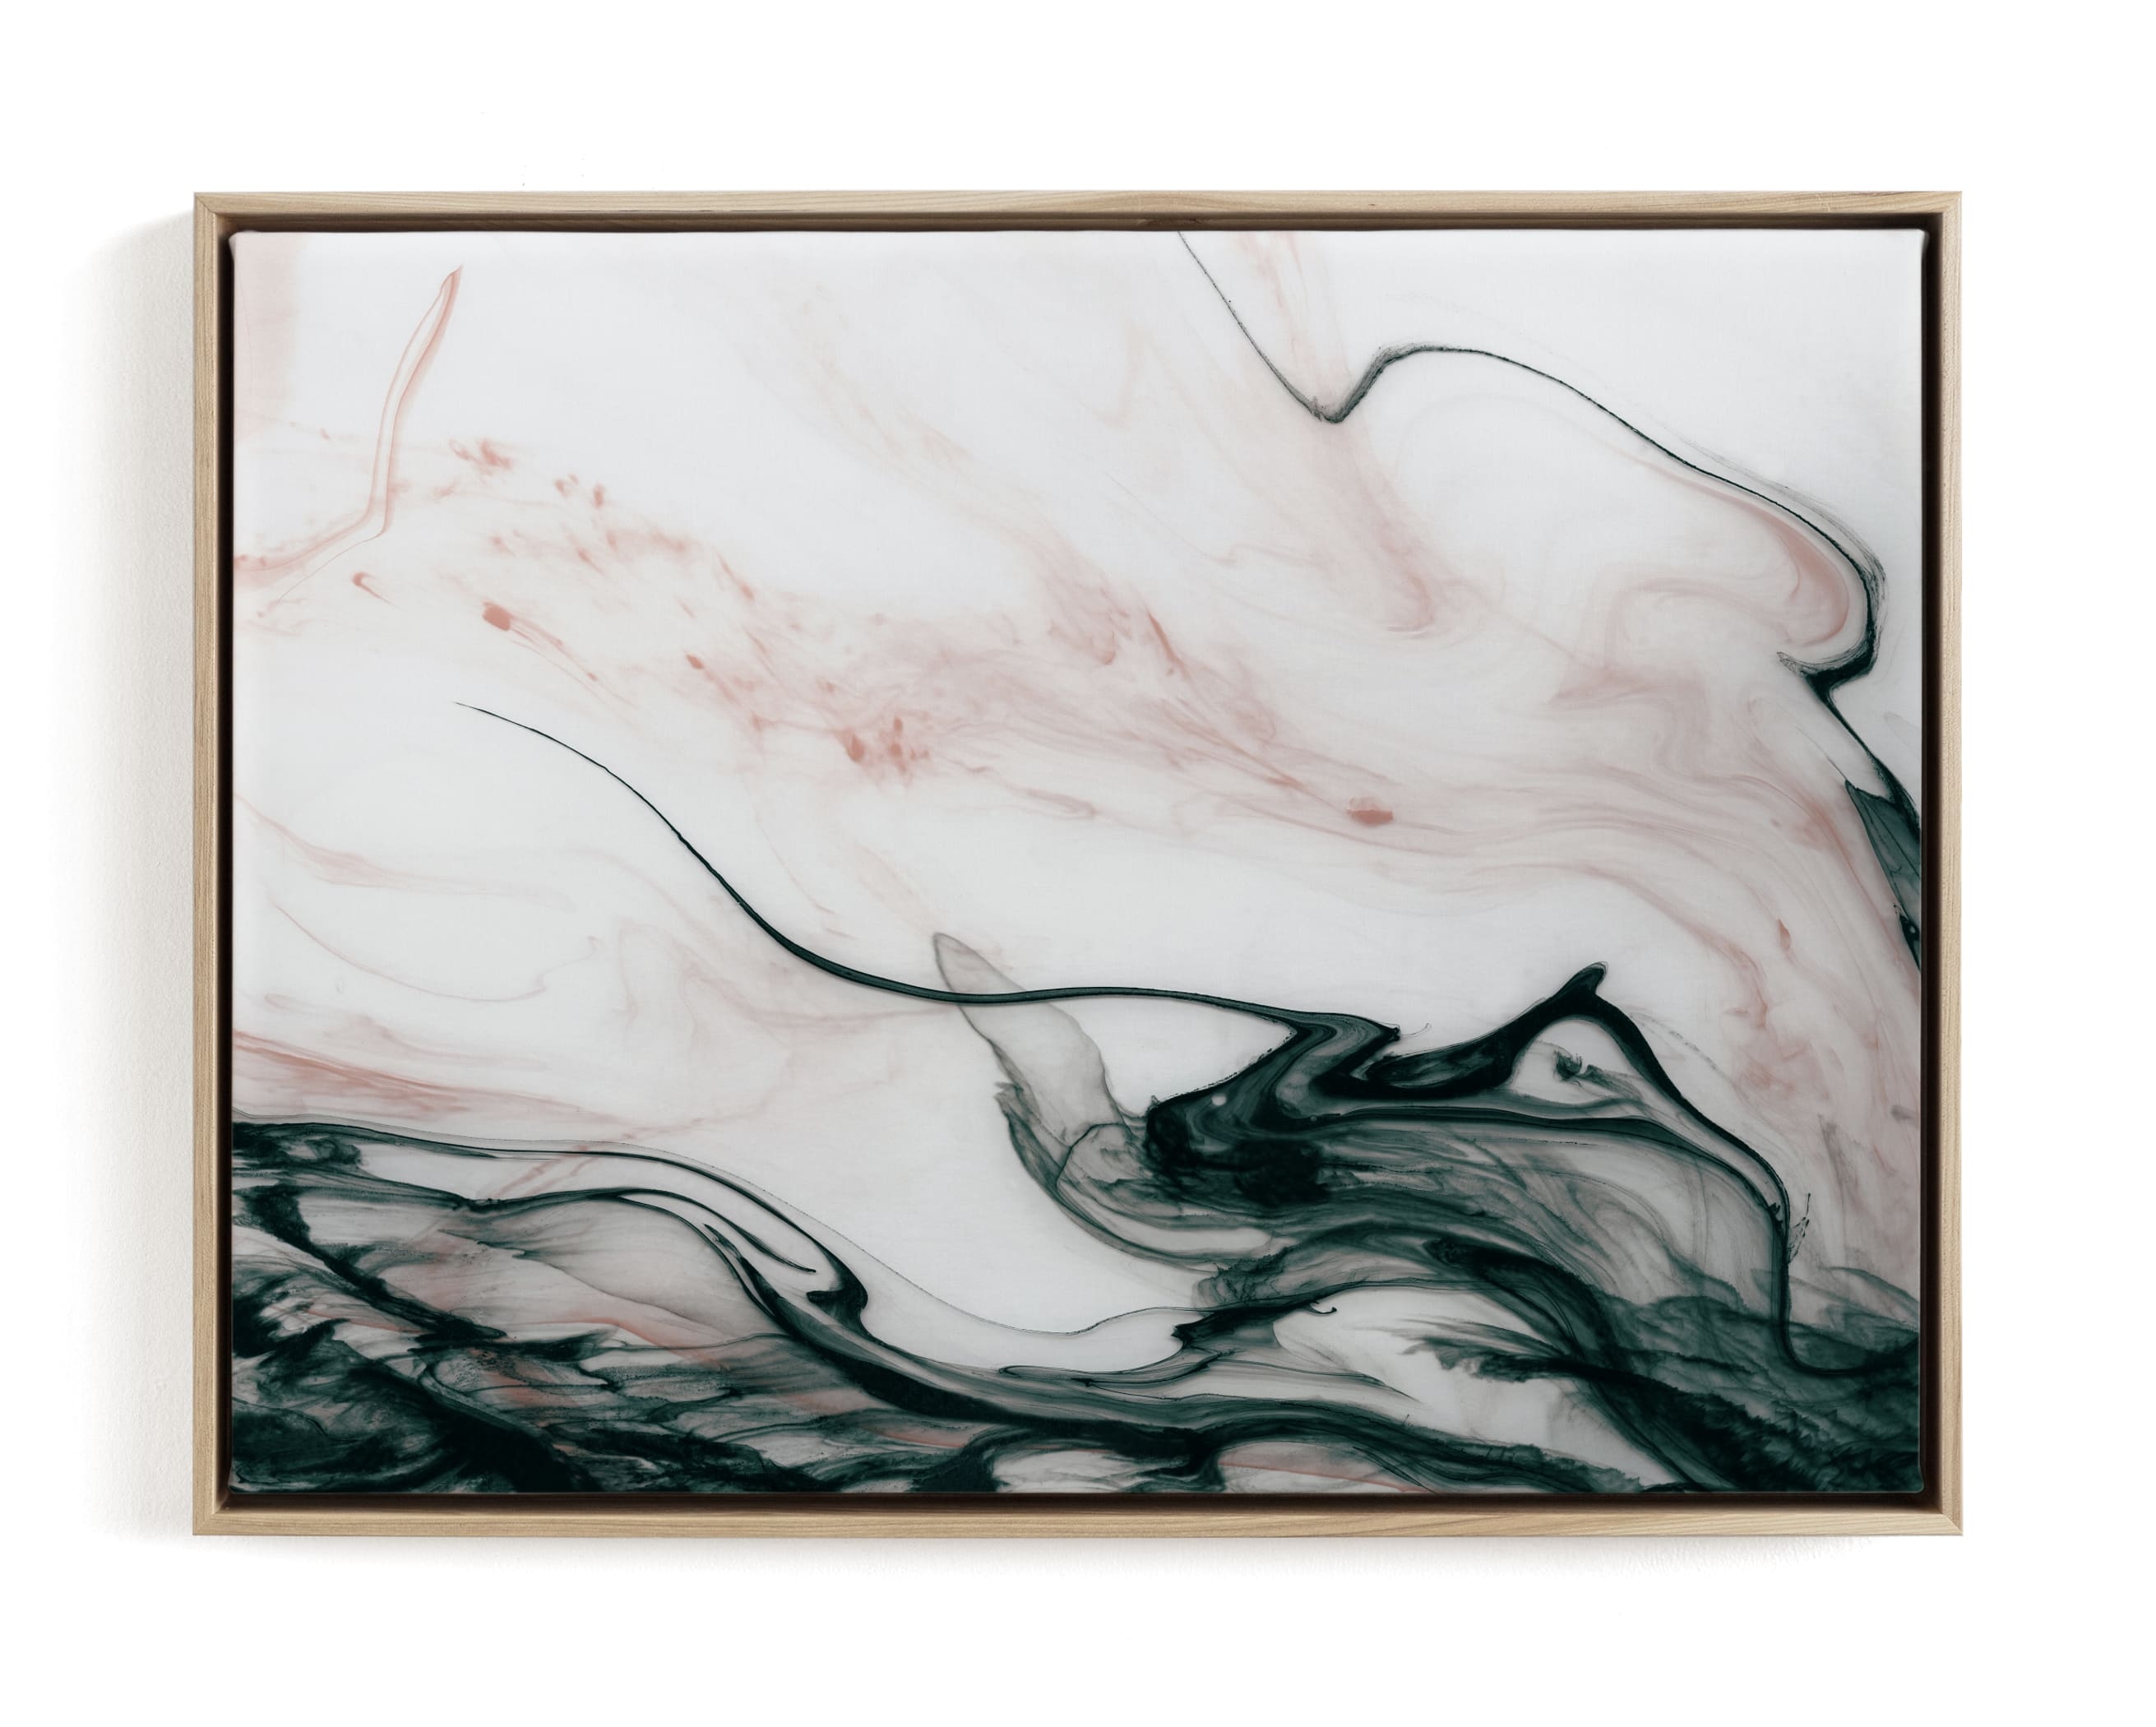 Ethereal Flow Limited Edition Fine Art Print - Image 0